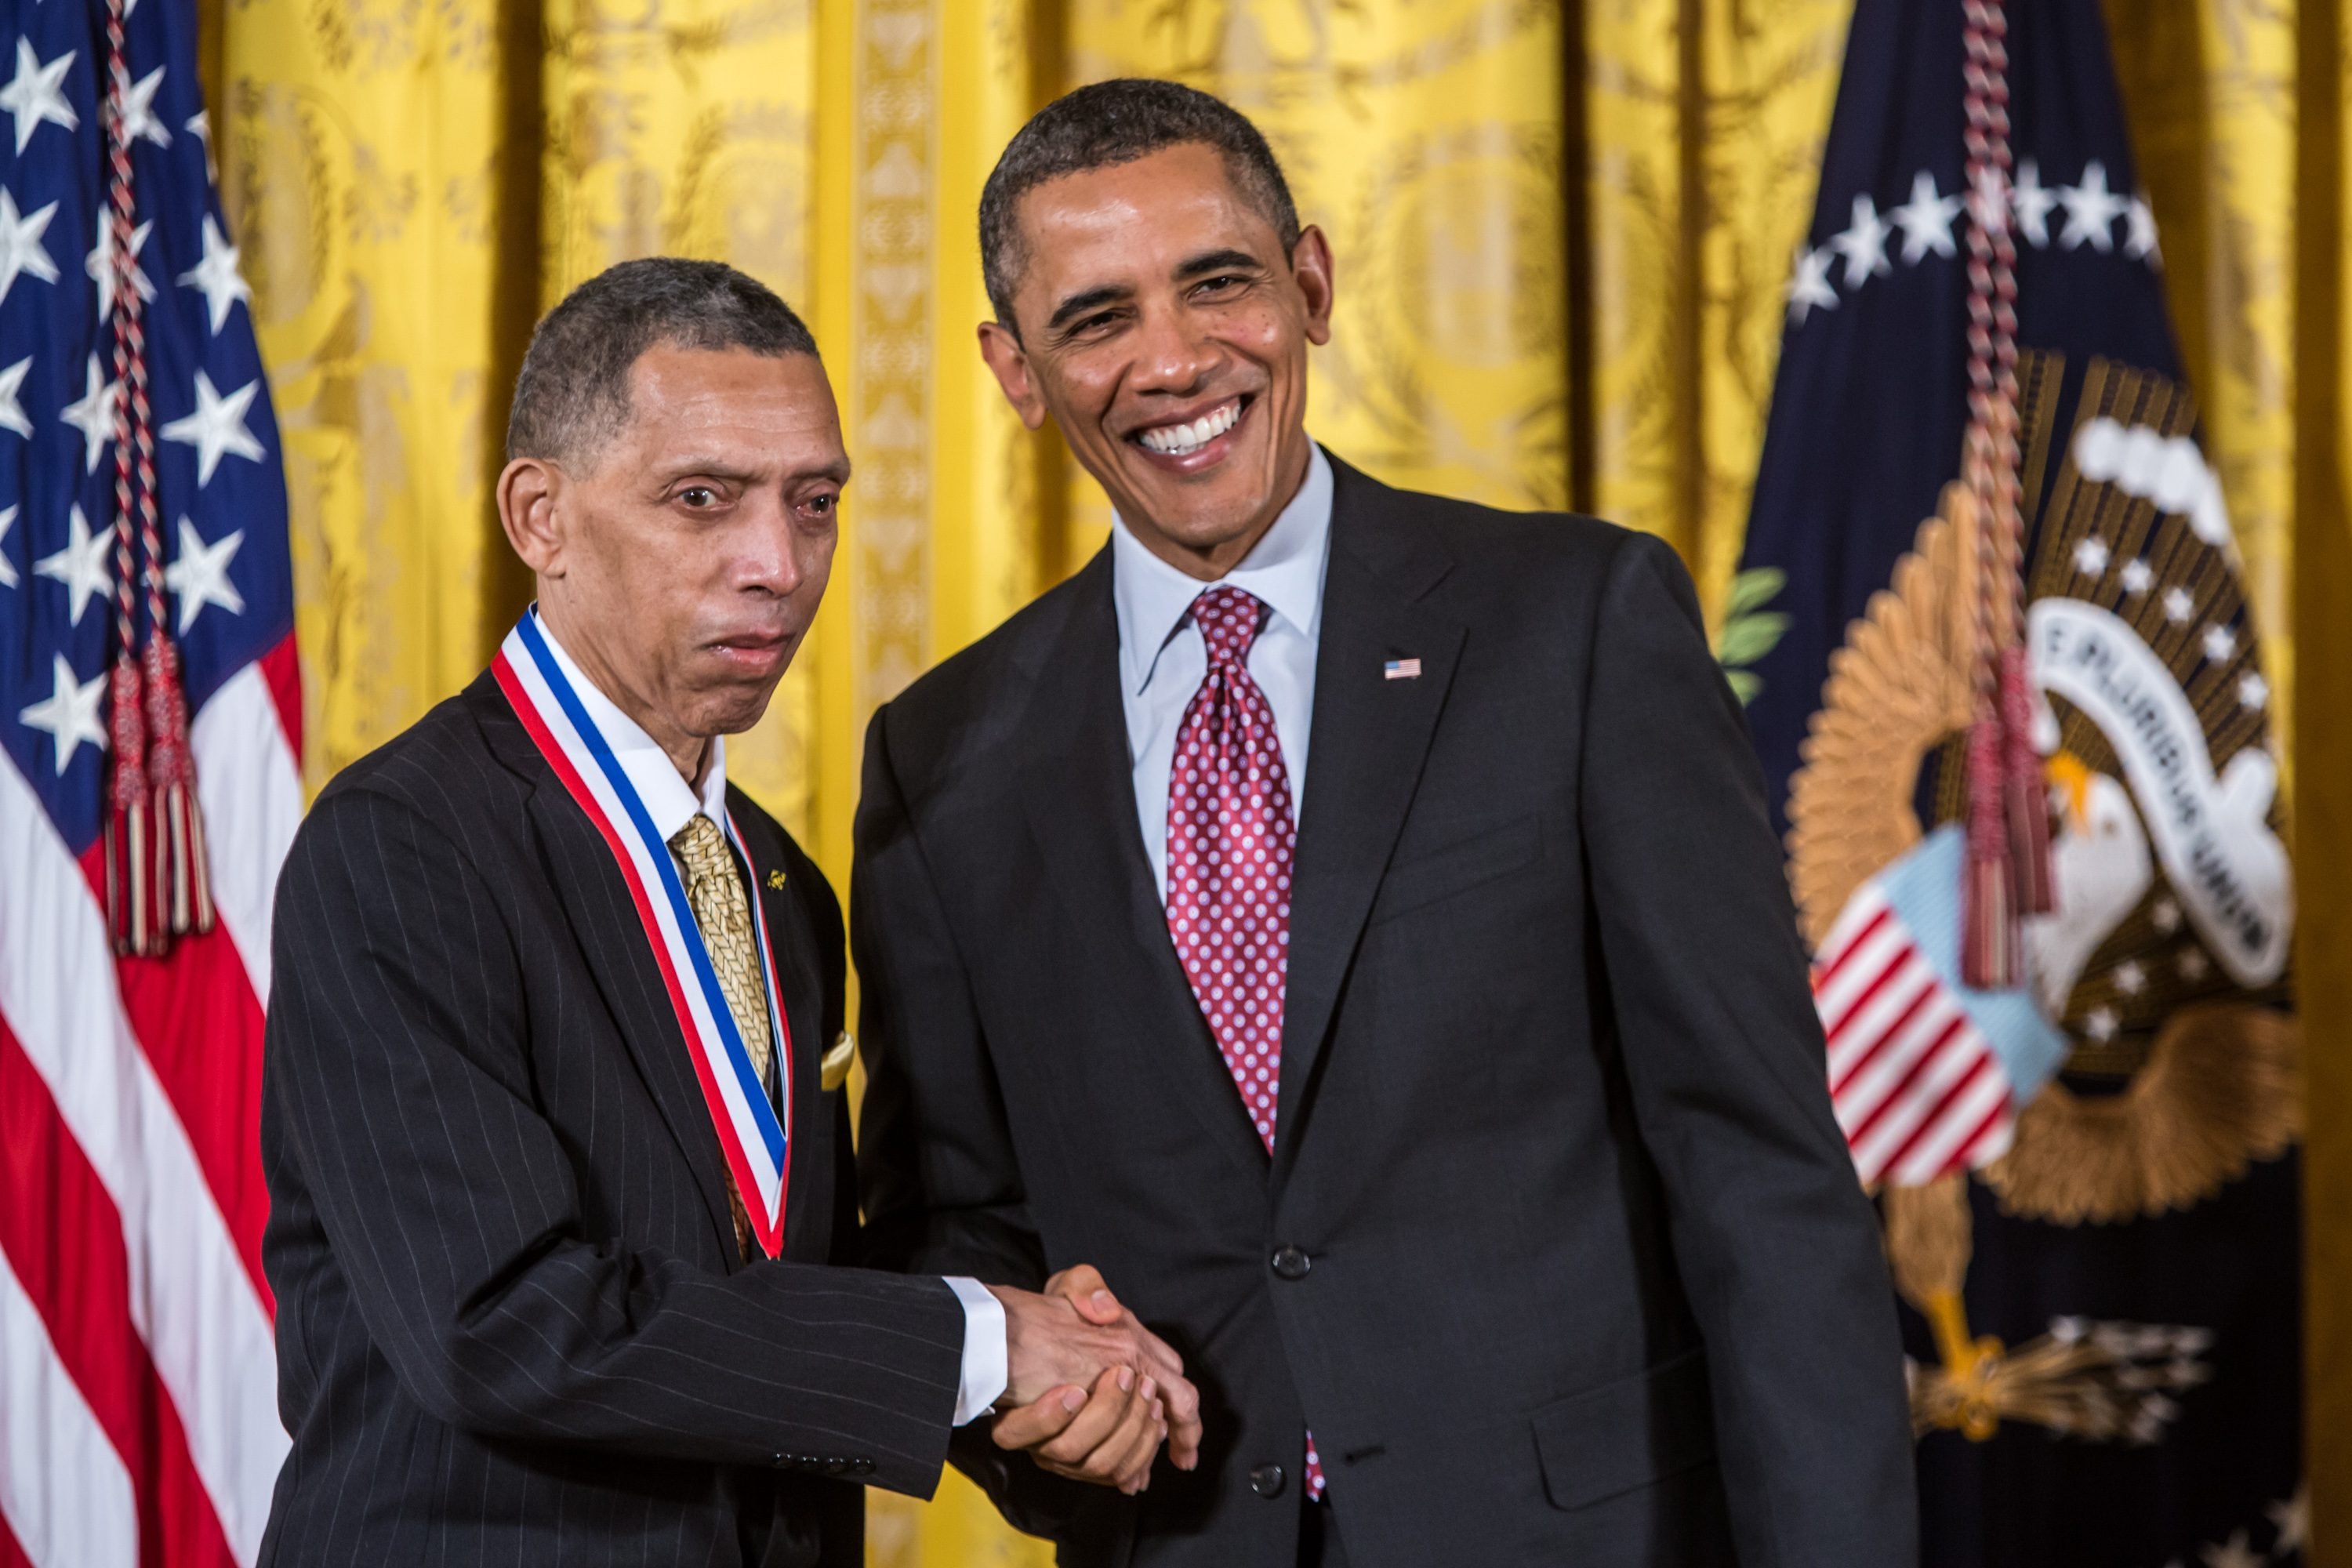 Obama Honors Winners Of The Nat'l Medal Of Science, Technology, Innovation